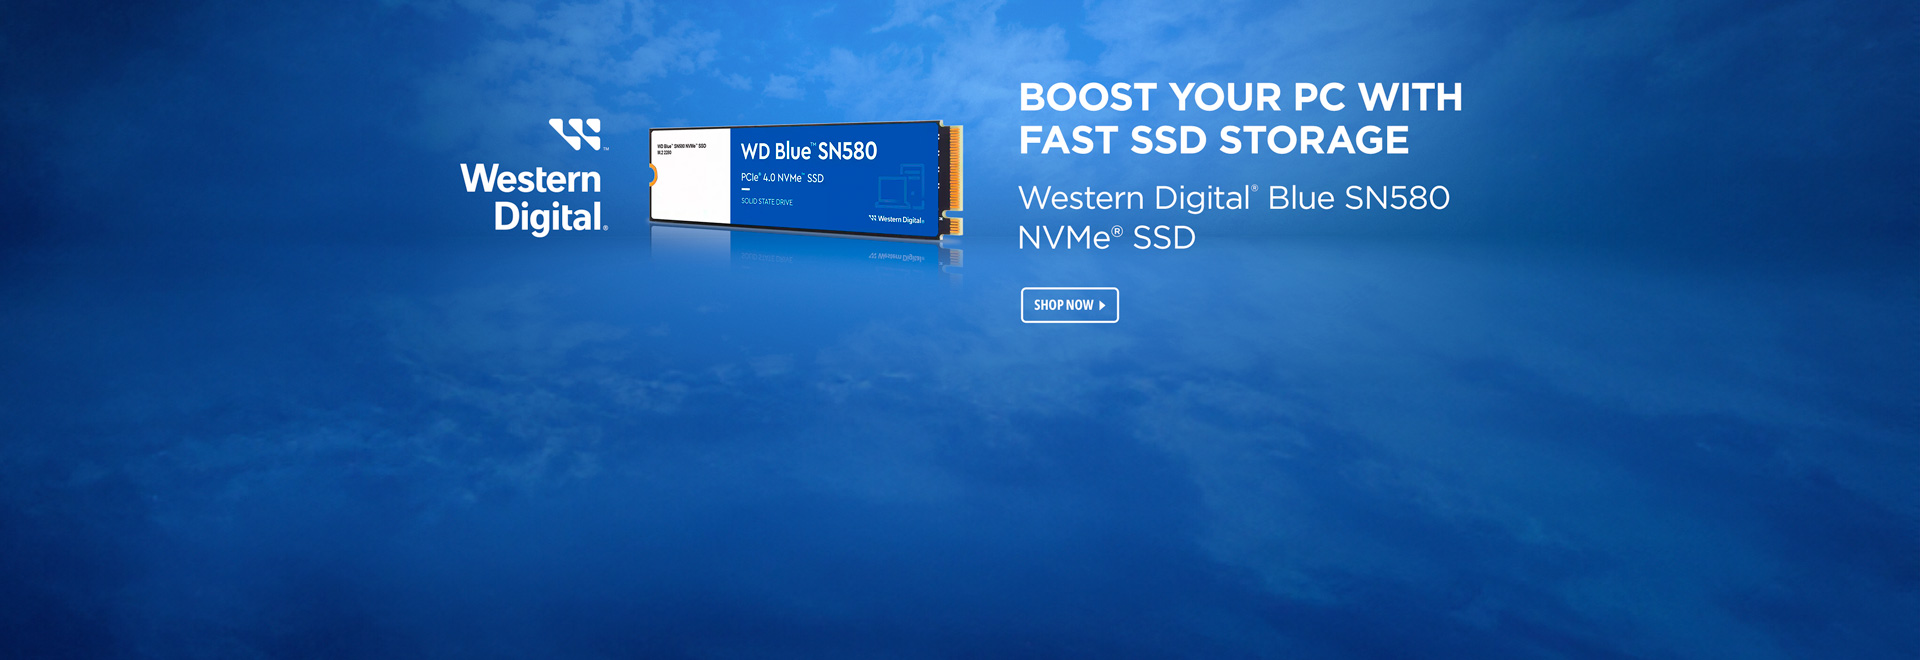  Boost your PC with fast SSD storage